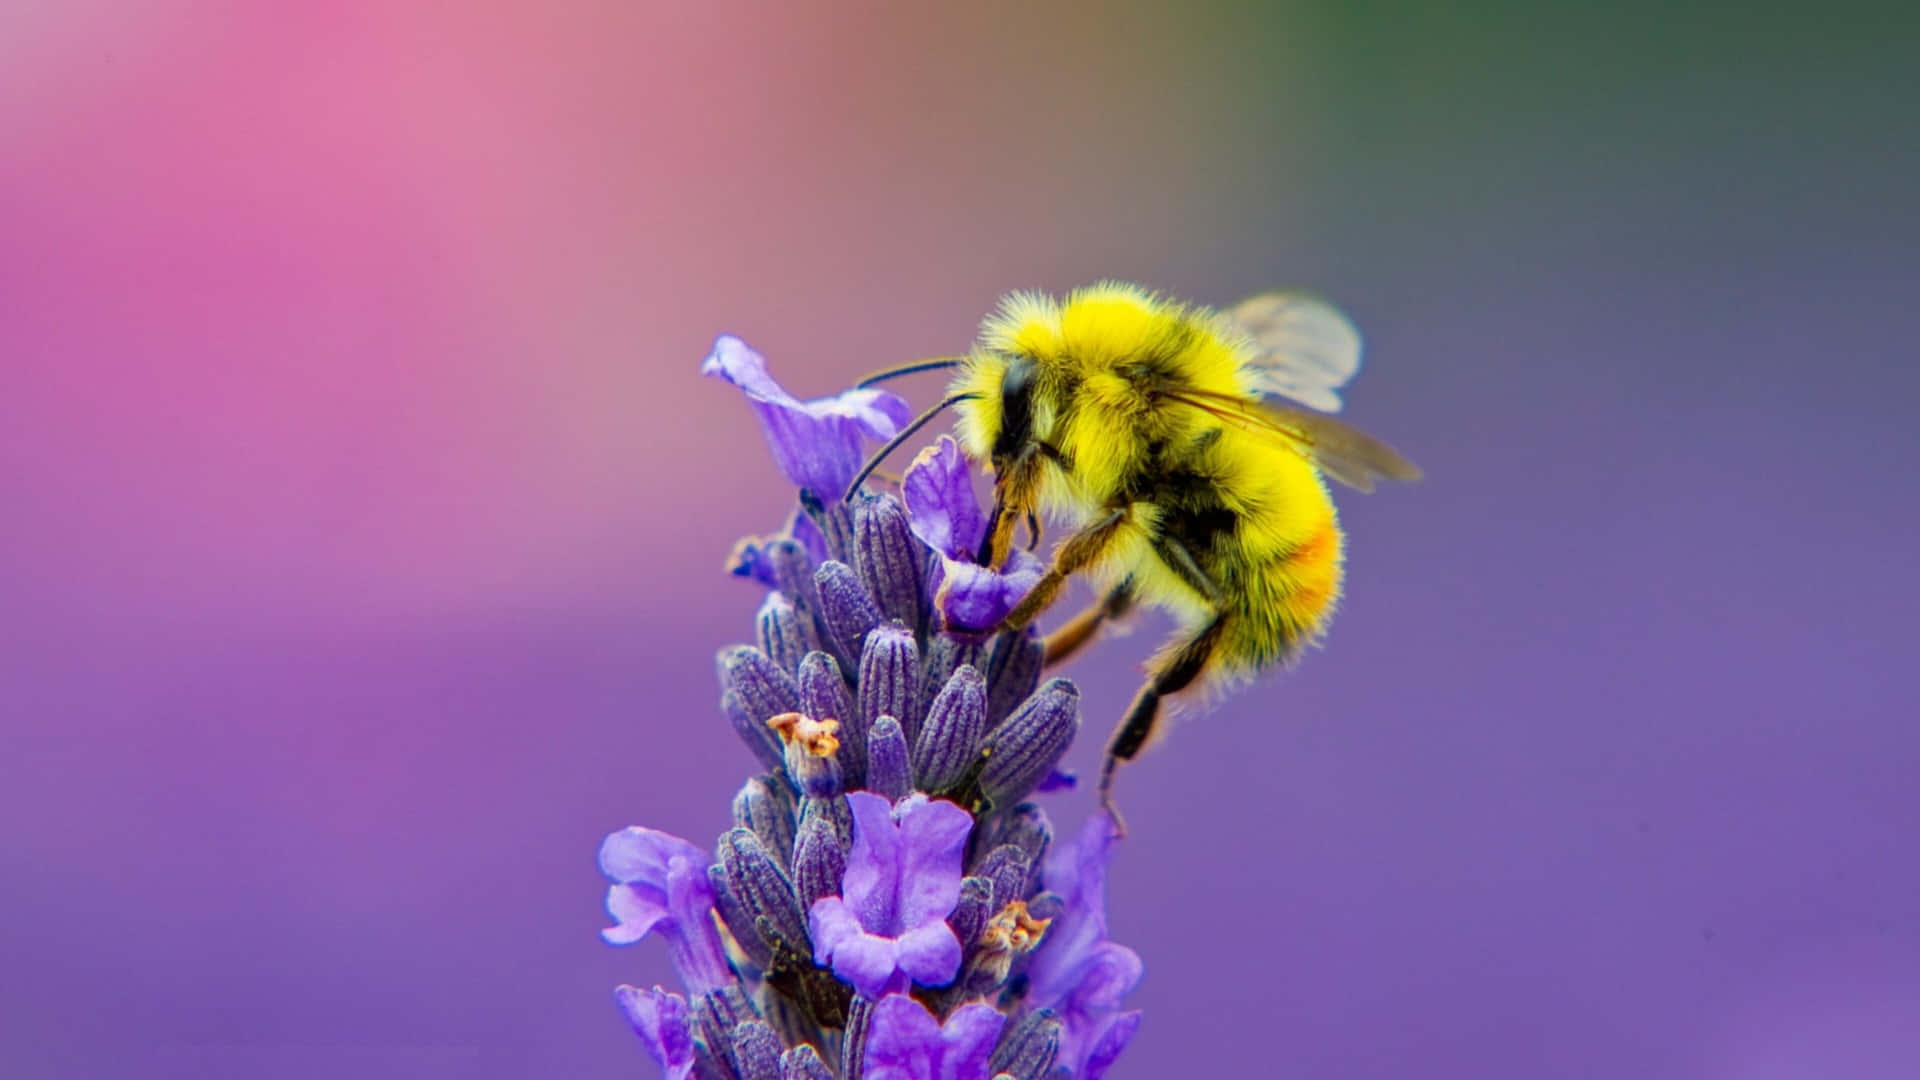 Cute Bee On Lavender Flower Picture